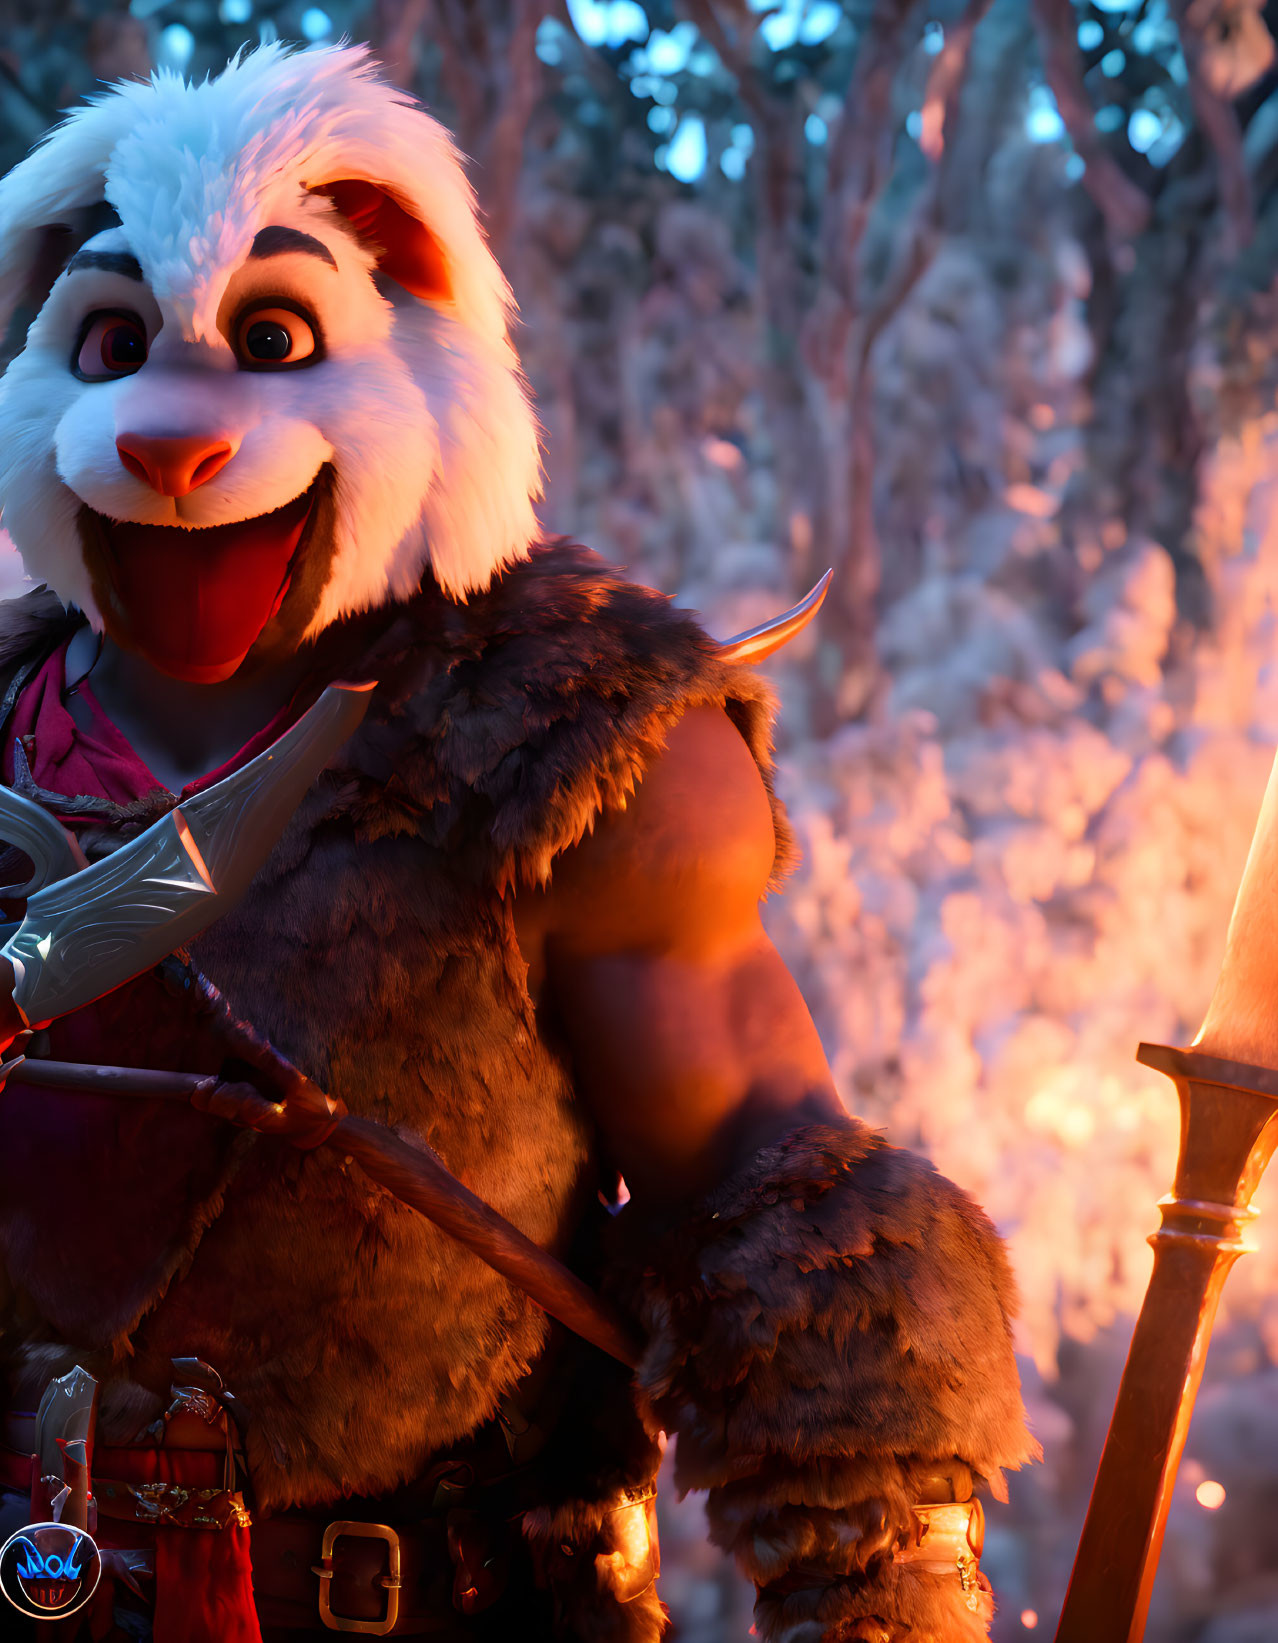 White-Furred Anthropomorphic Character in Forest Setting